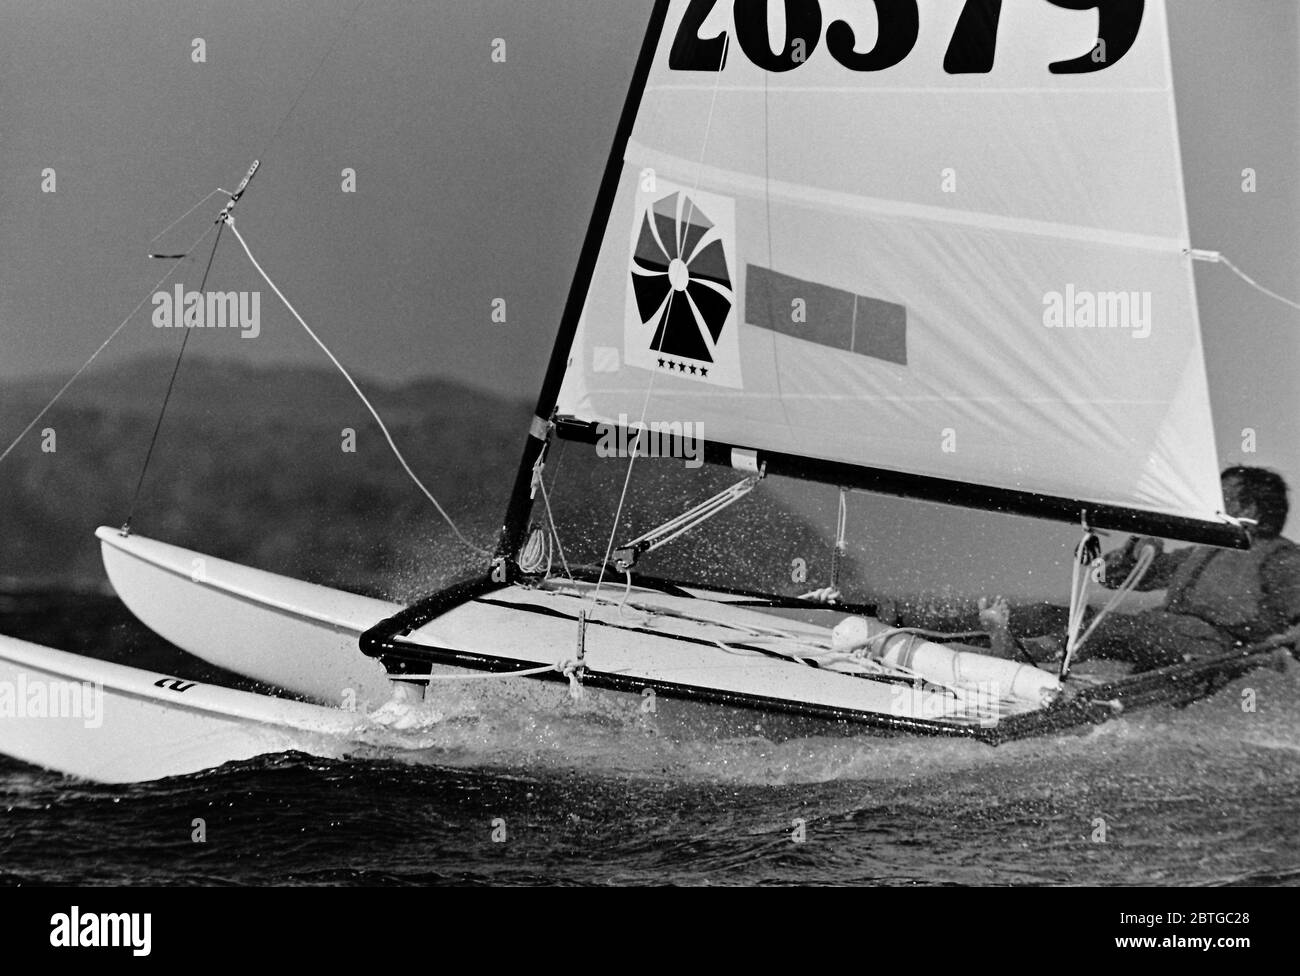 AJAXNETPHOTO. 1977. LAS SALINAS BAY, LANZAROTE, SPAIN. - A COMPETITOR RACING IN A STIFF BREEZE AND CHOPPY WATERS IN THE HOBIE CAT 14 WORLD CHAMPIONSHIPS. PHOTO:JONATHAN EASTLAND/AJAX REF:7726091 30 Stock Photo